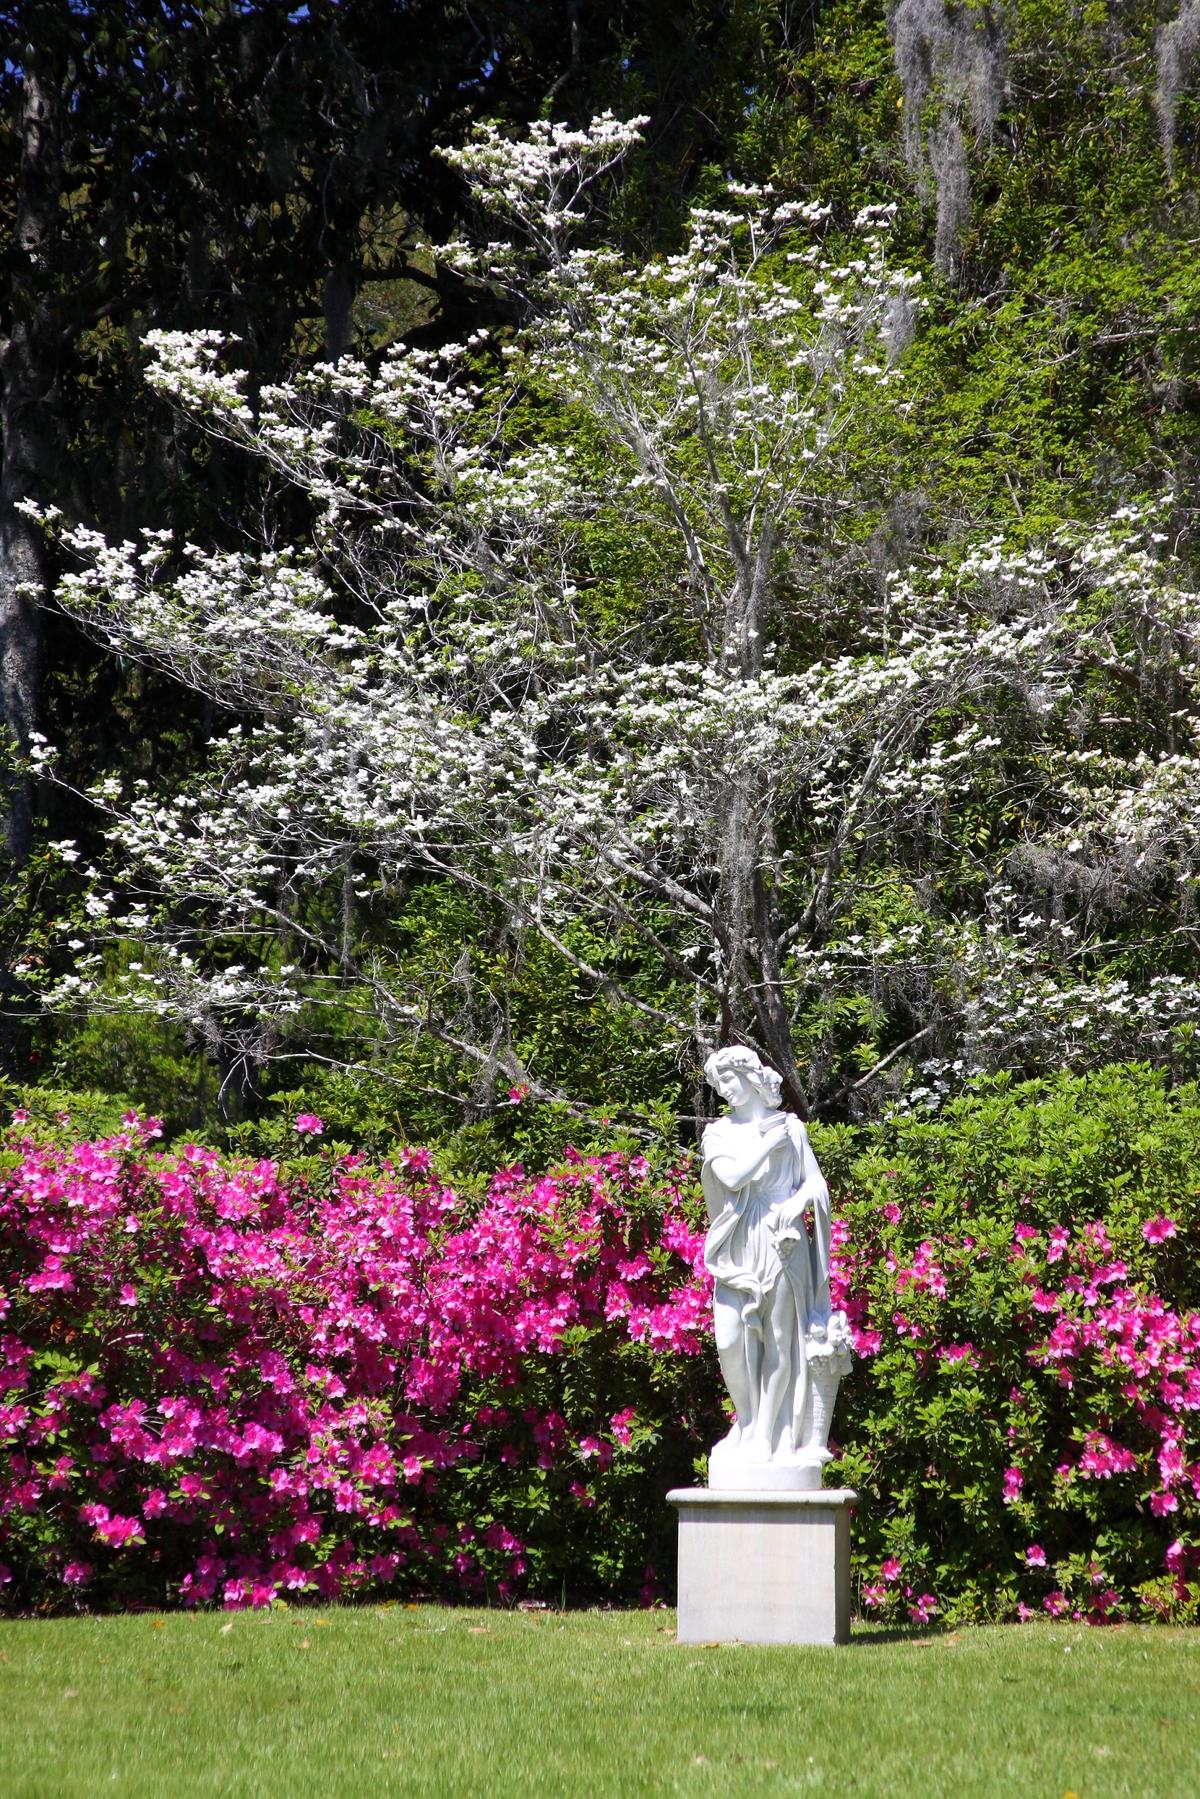 A garden blooms with azaleas in the spring. (Courtesy of Middleton Place)